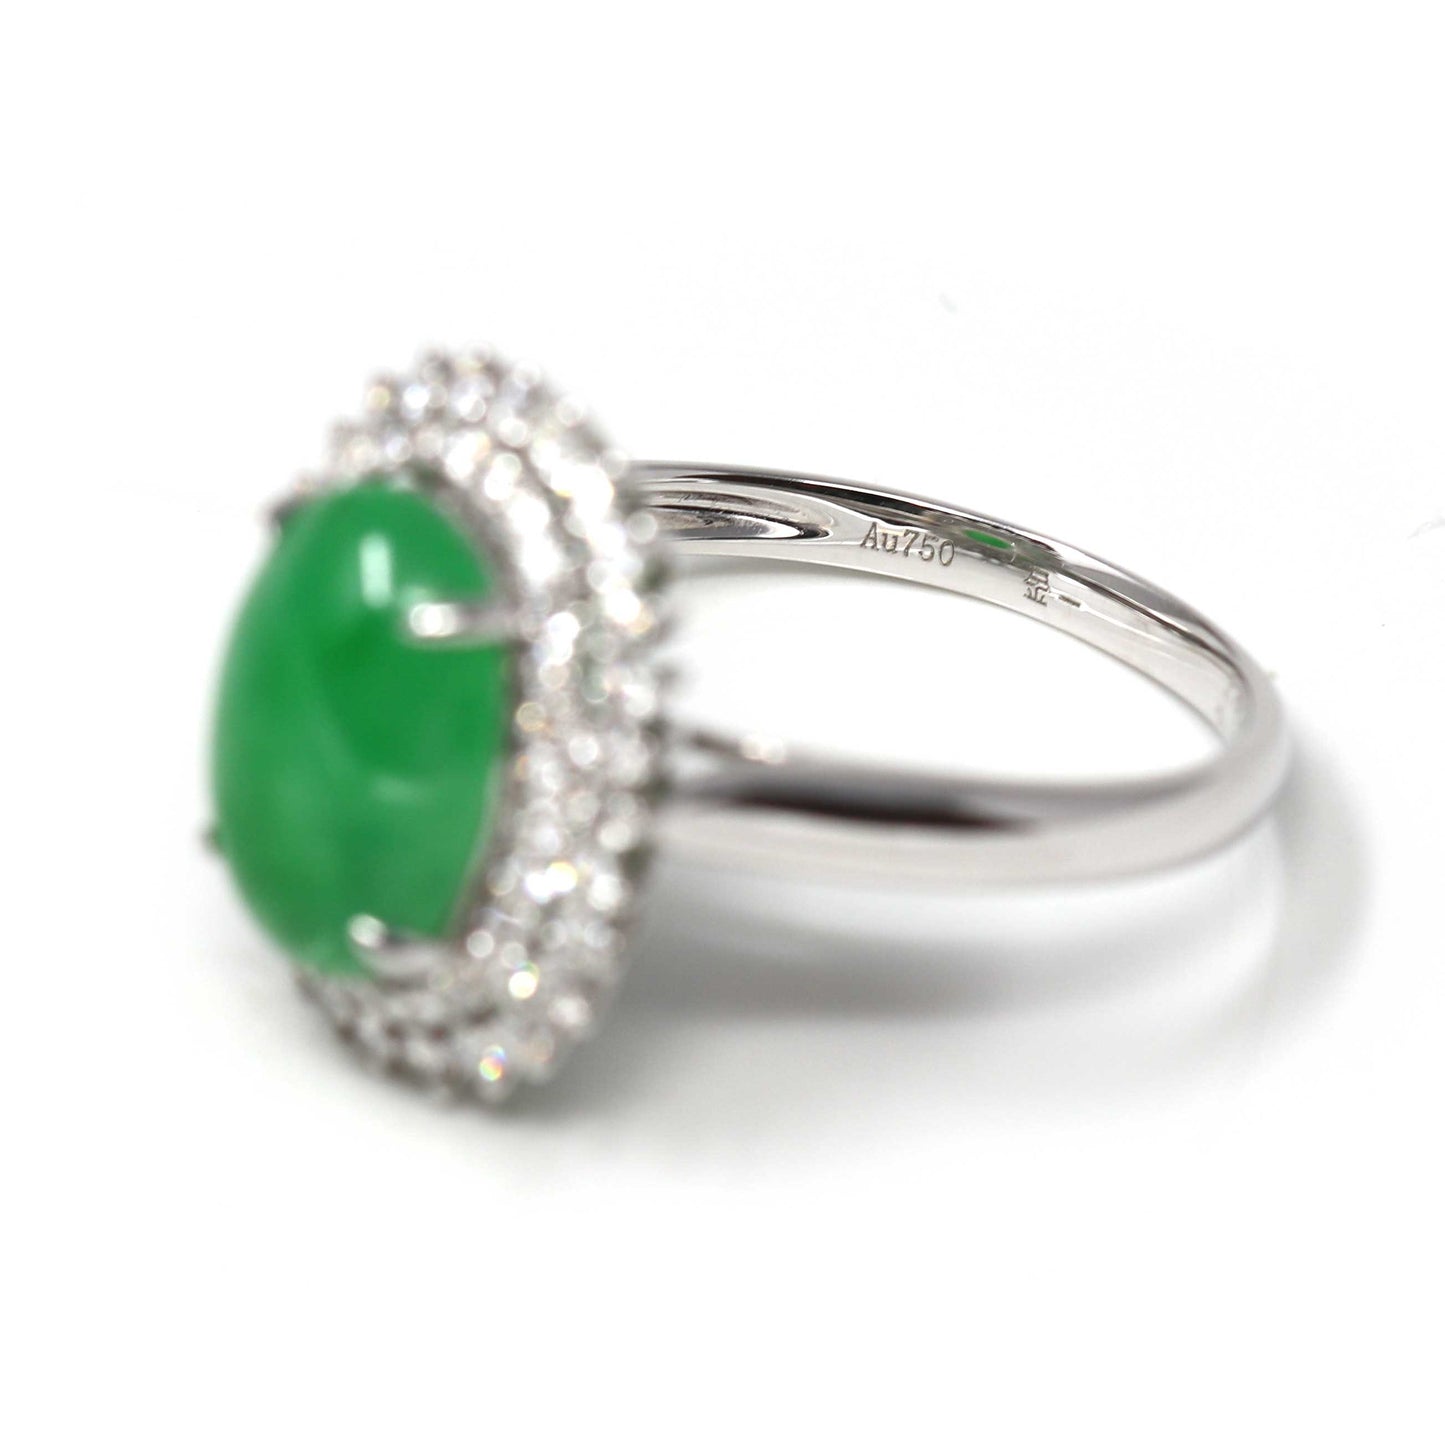 RealJade™ Signature Double Halo 18k White Gold Natural Imperial Green Jadeite Jade Engagement Ring JR23